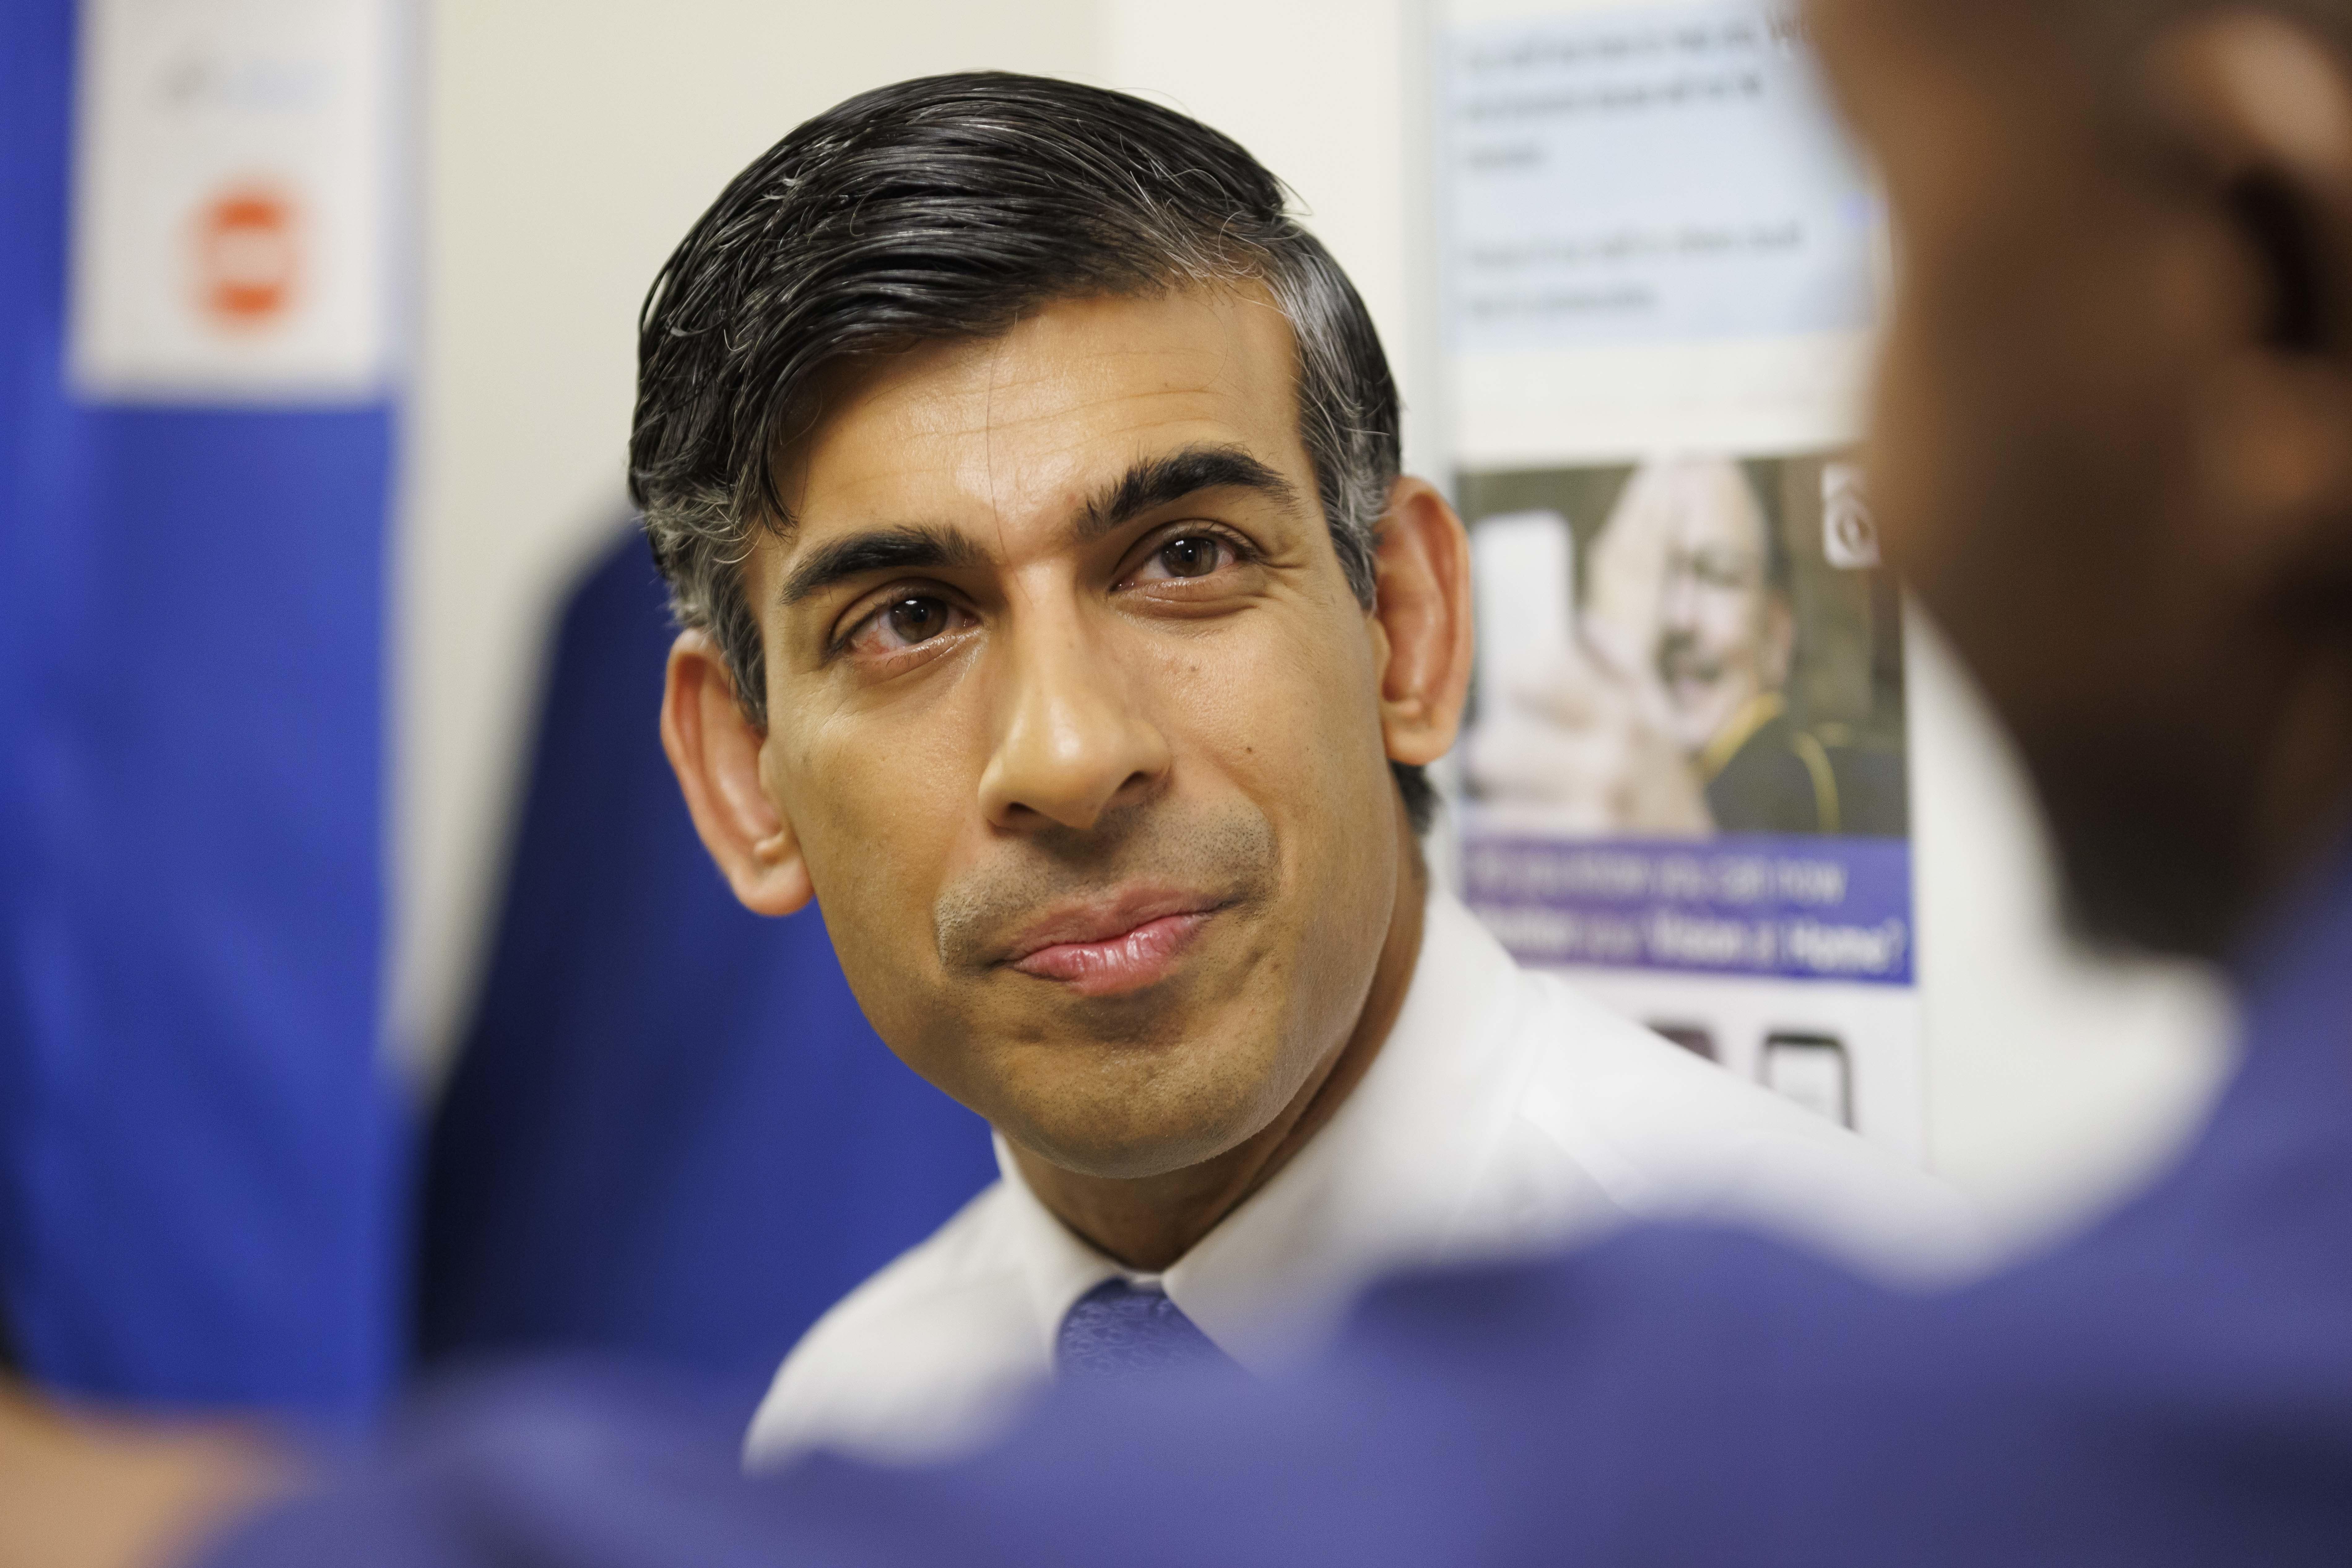 Prime Minister Rishi Sunak says his focus remains on halving inflation (Jaime Lorriman/The Daily Telegraph)